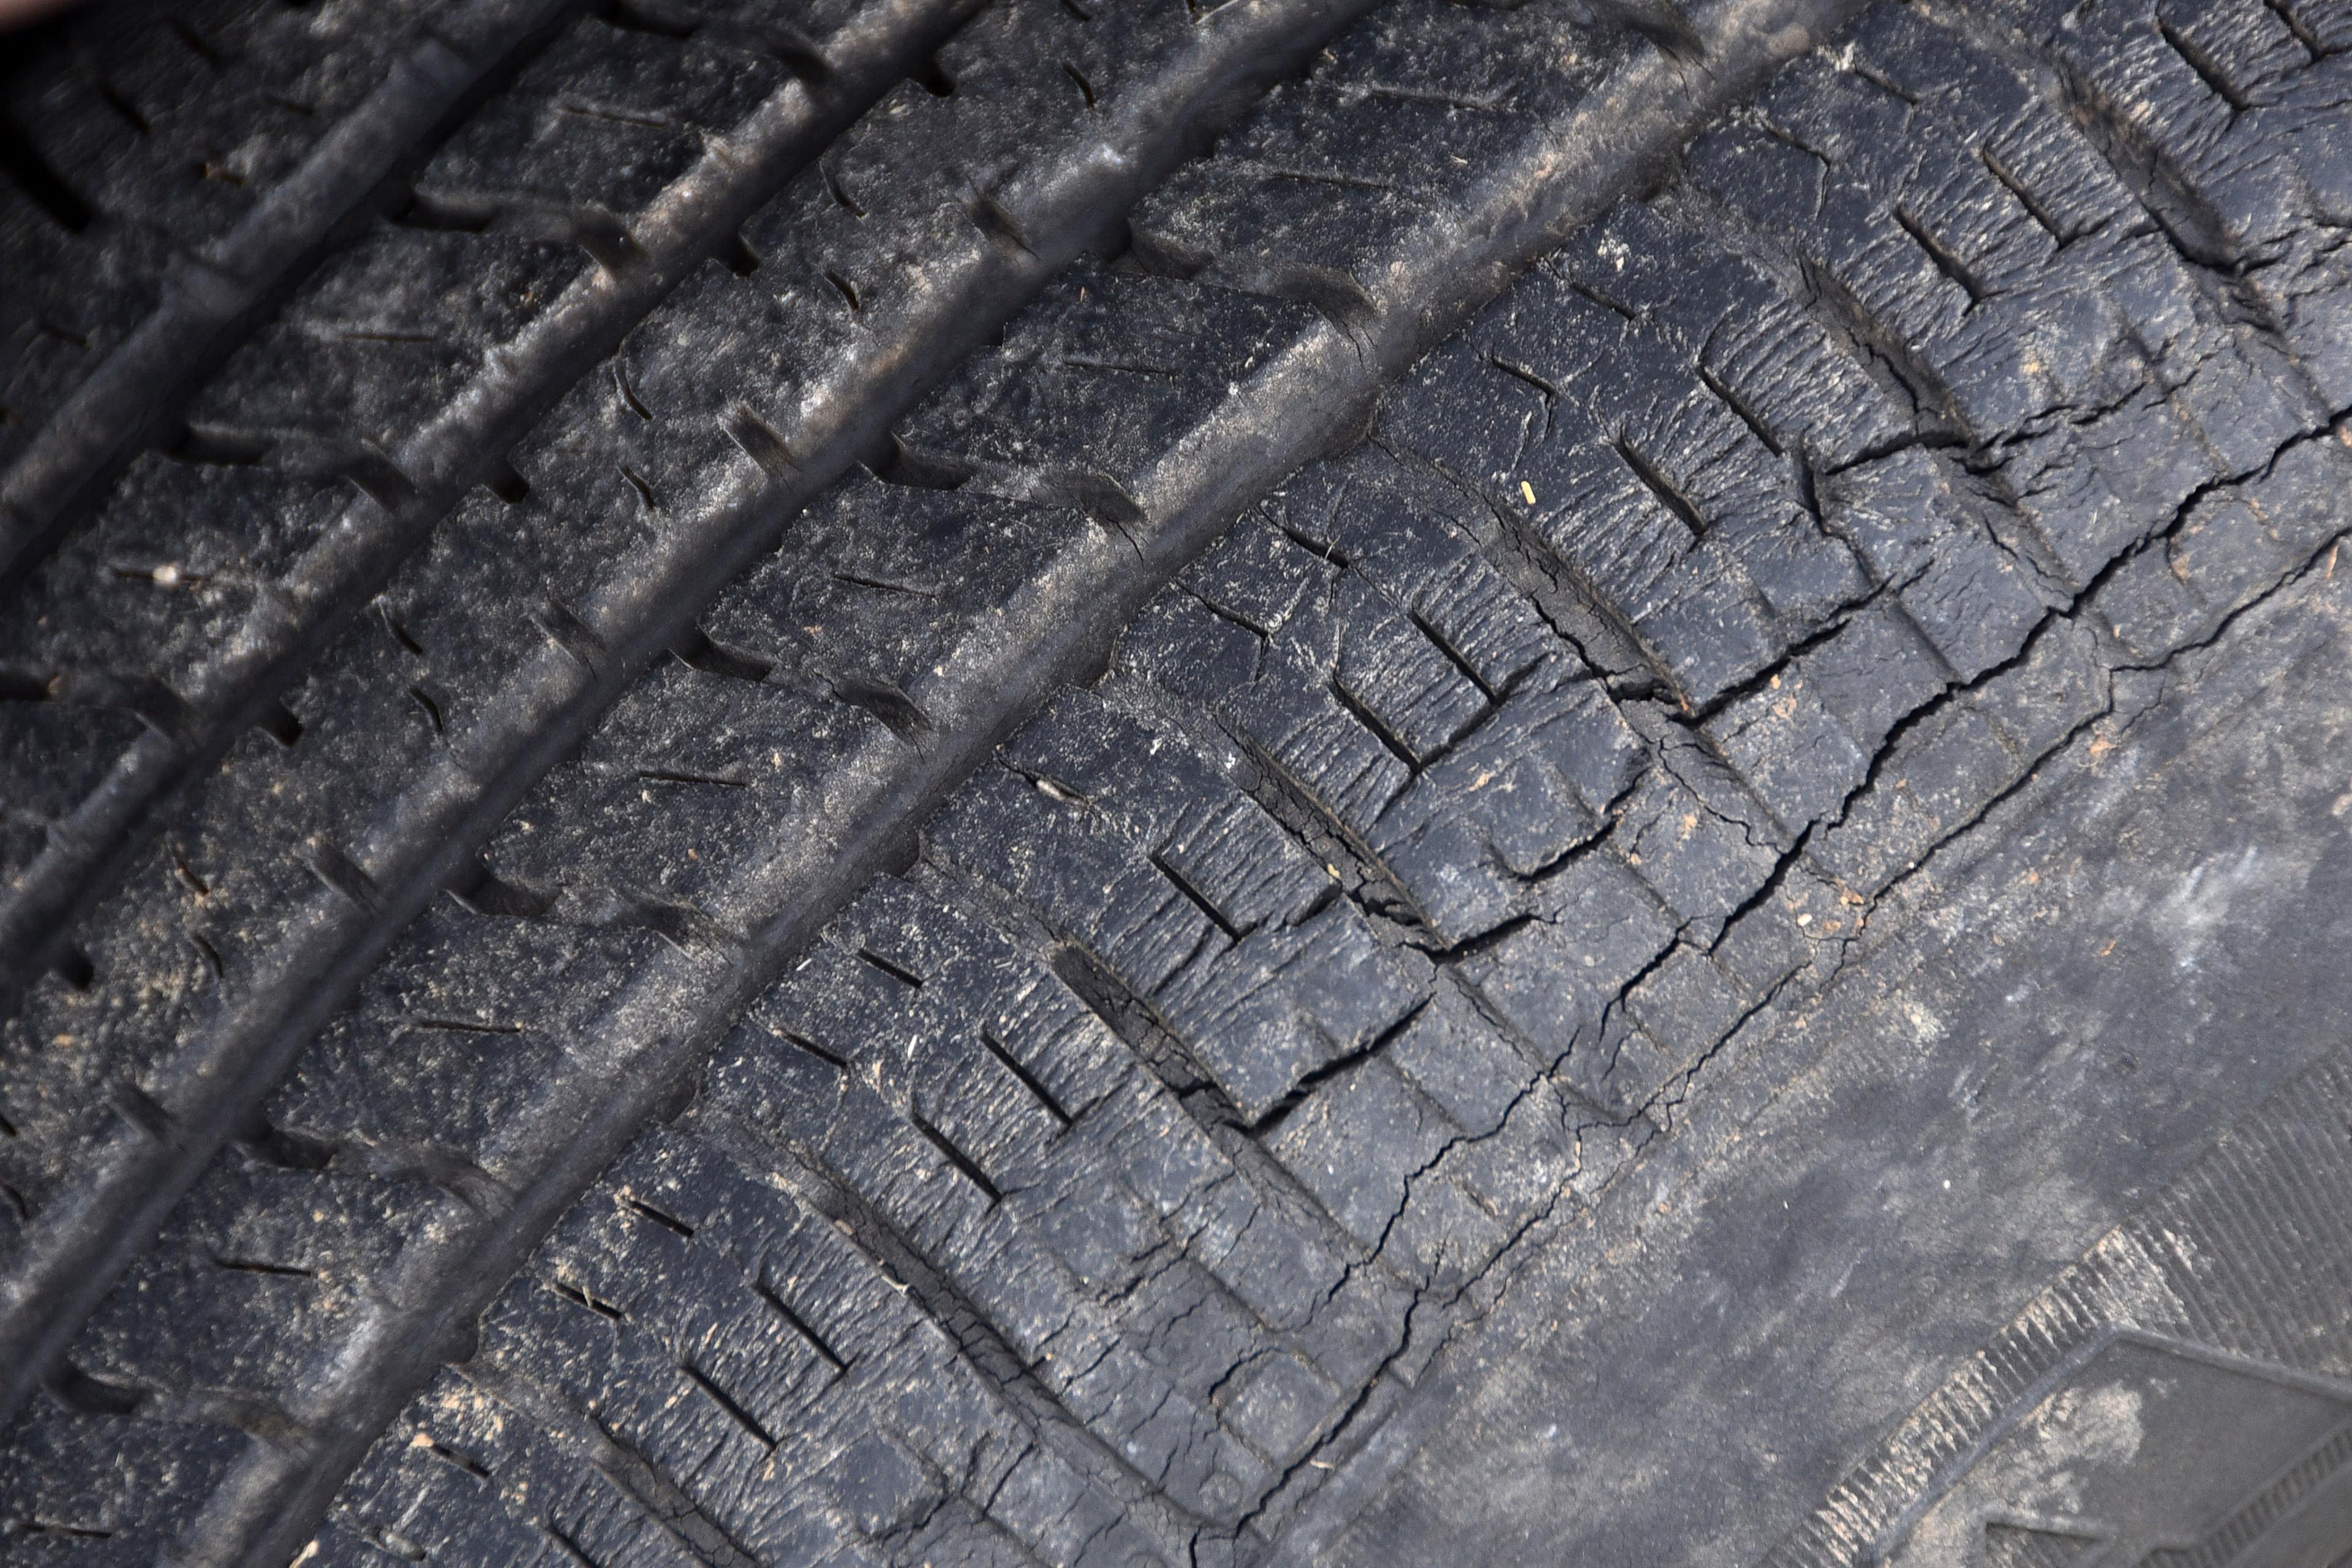 How to Clean Your Tires (Stop Using These Chemicals!)